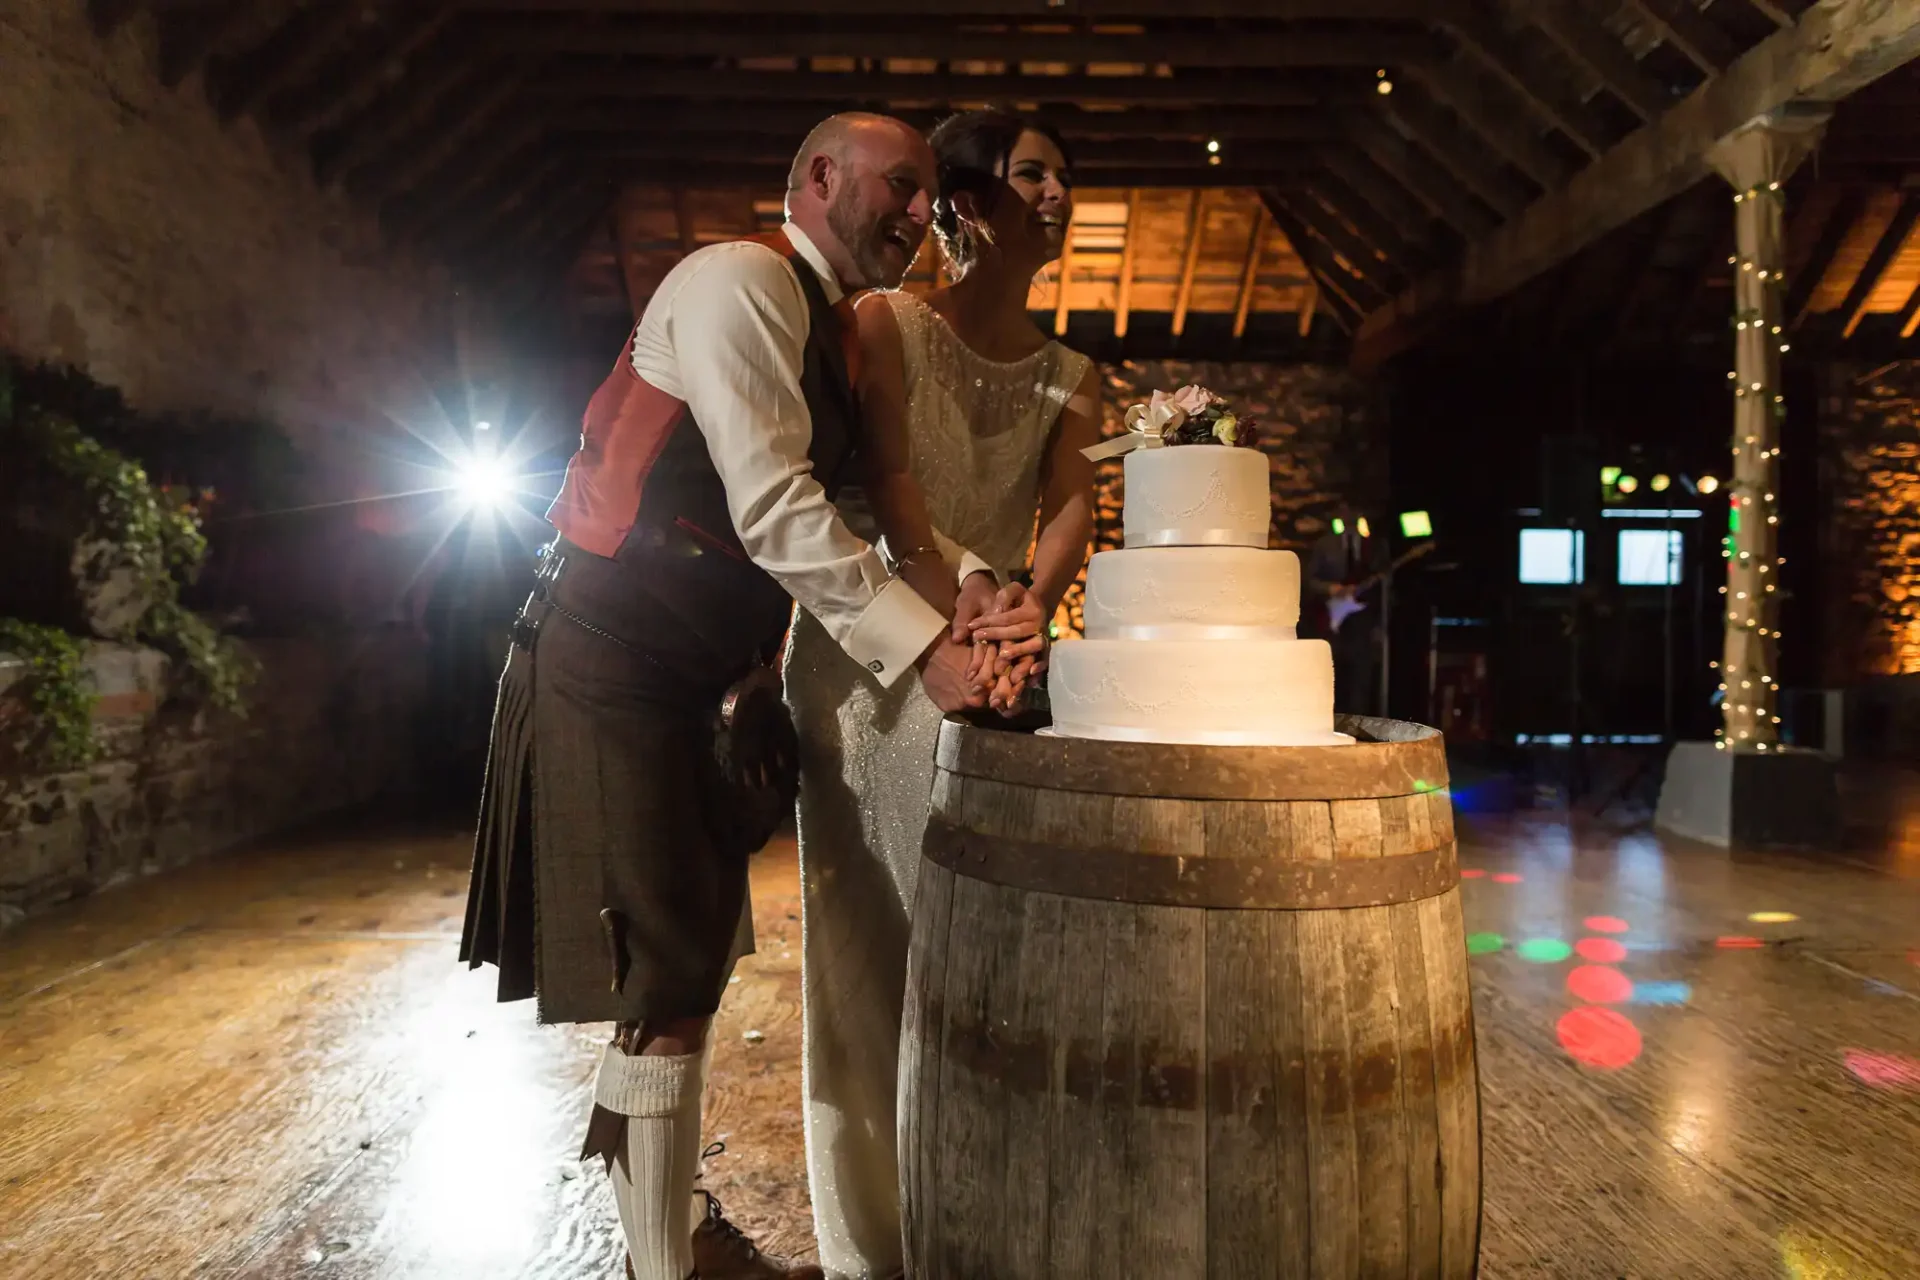 A couple in wedding attire, the man in a kilt, cutting a cake on a barrel in a dimly lit rustic room with festive lights.